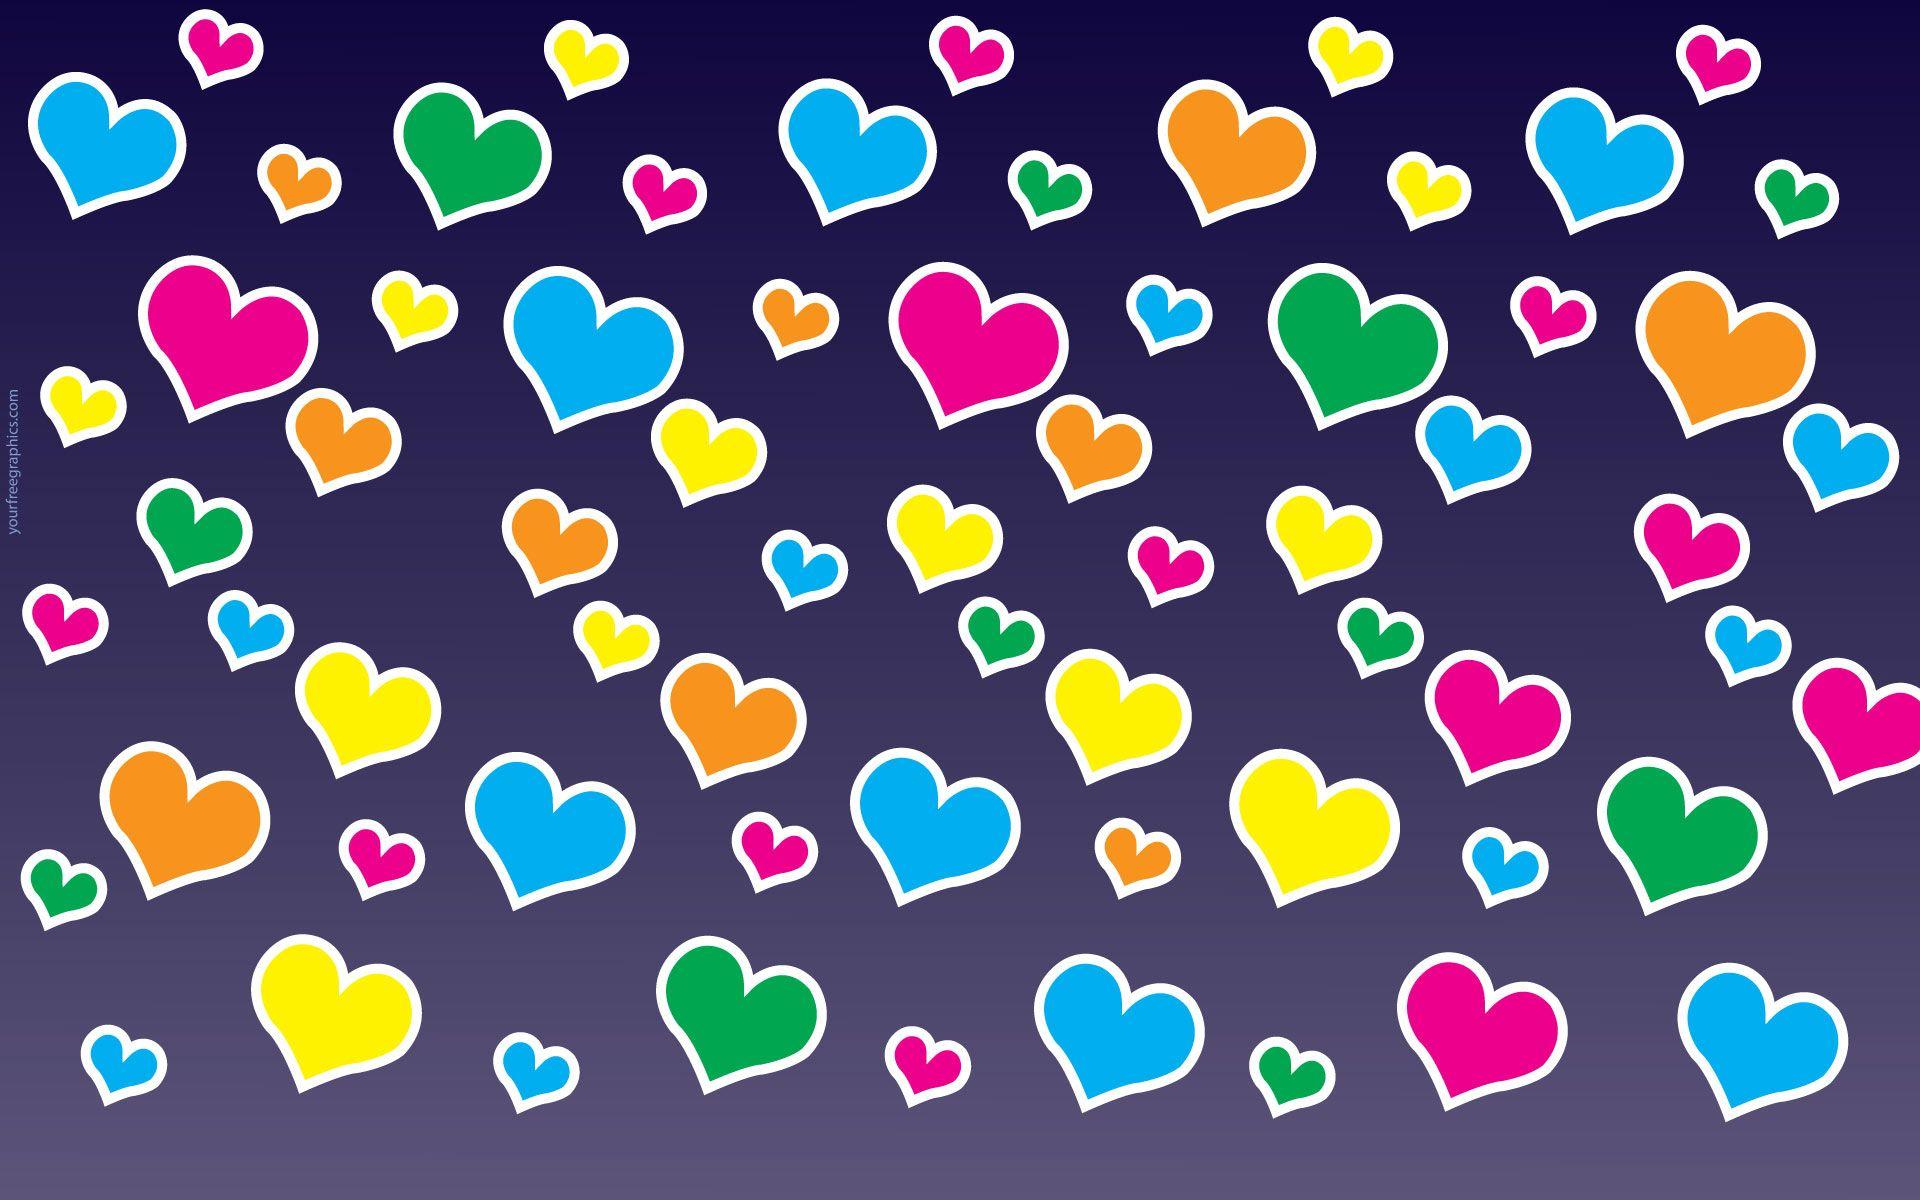 Wallpaper For > Colorful Hearts Wallpaper